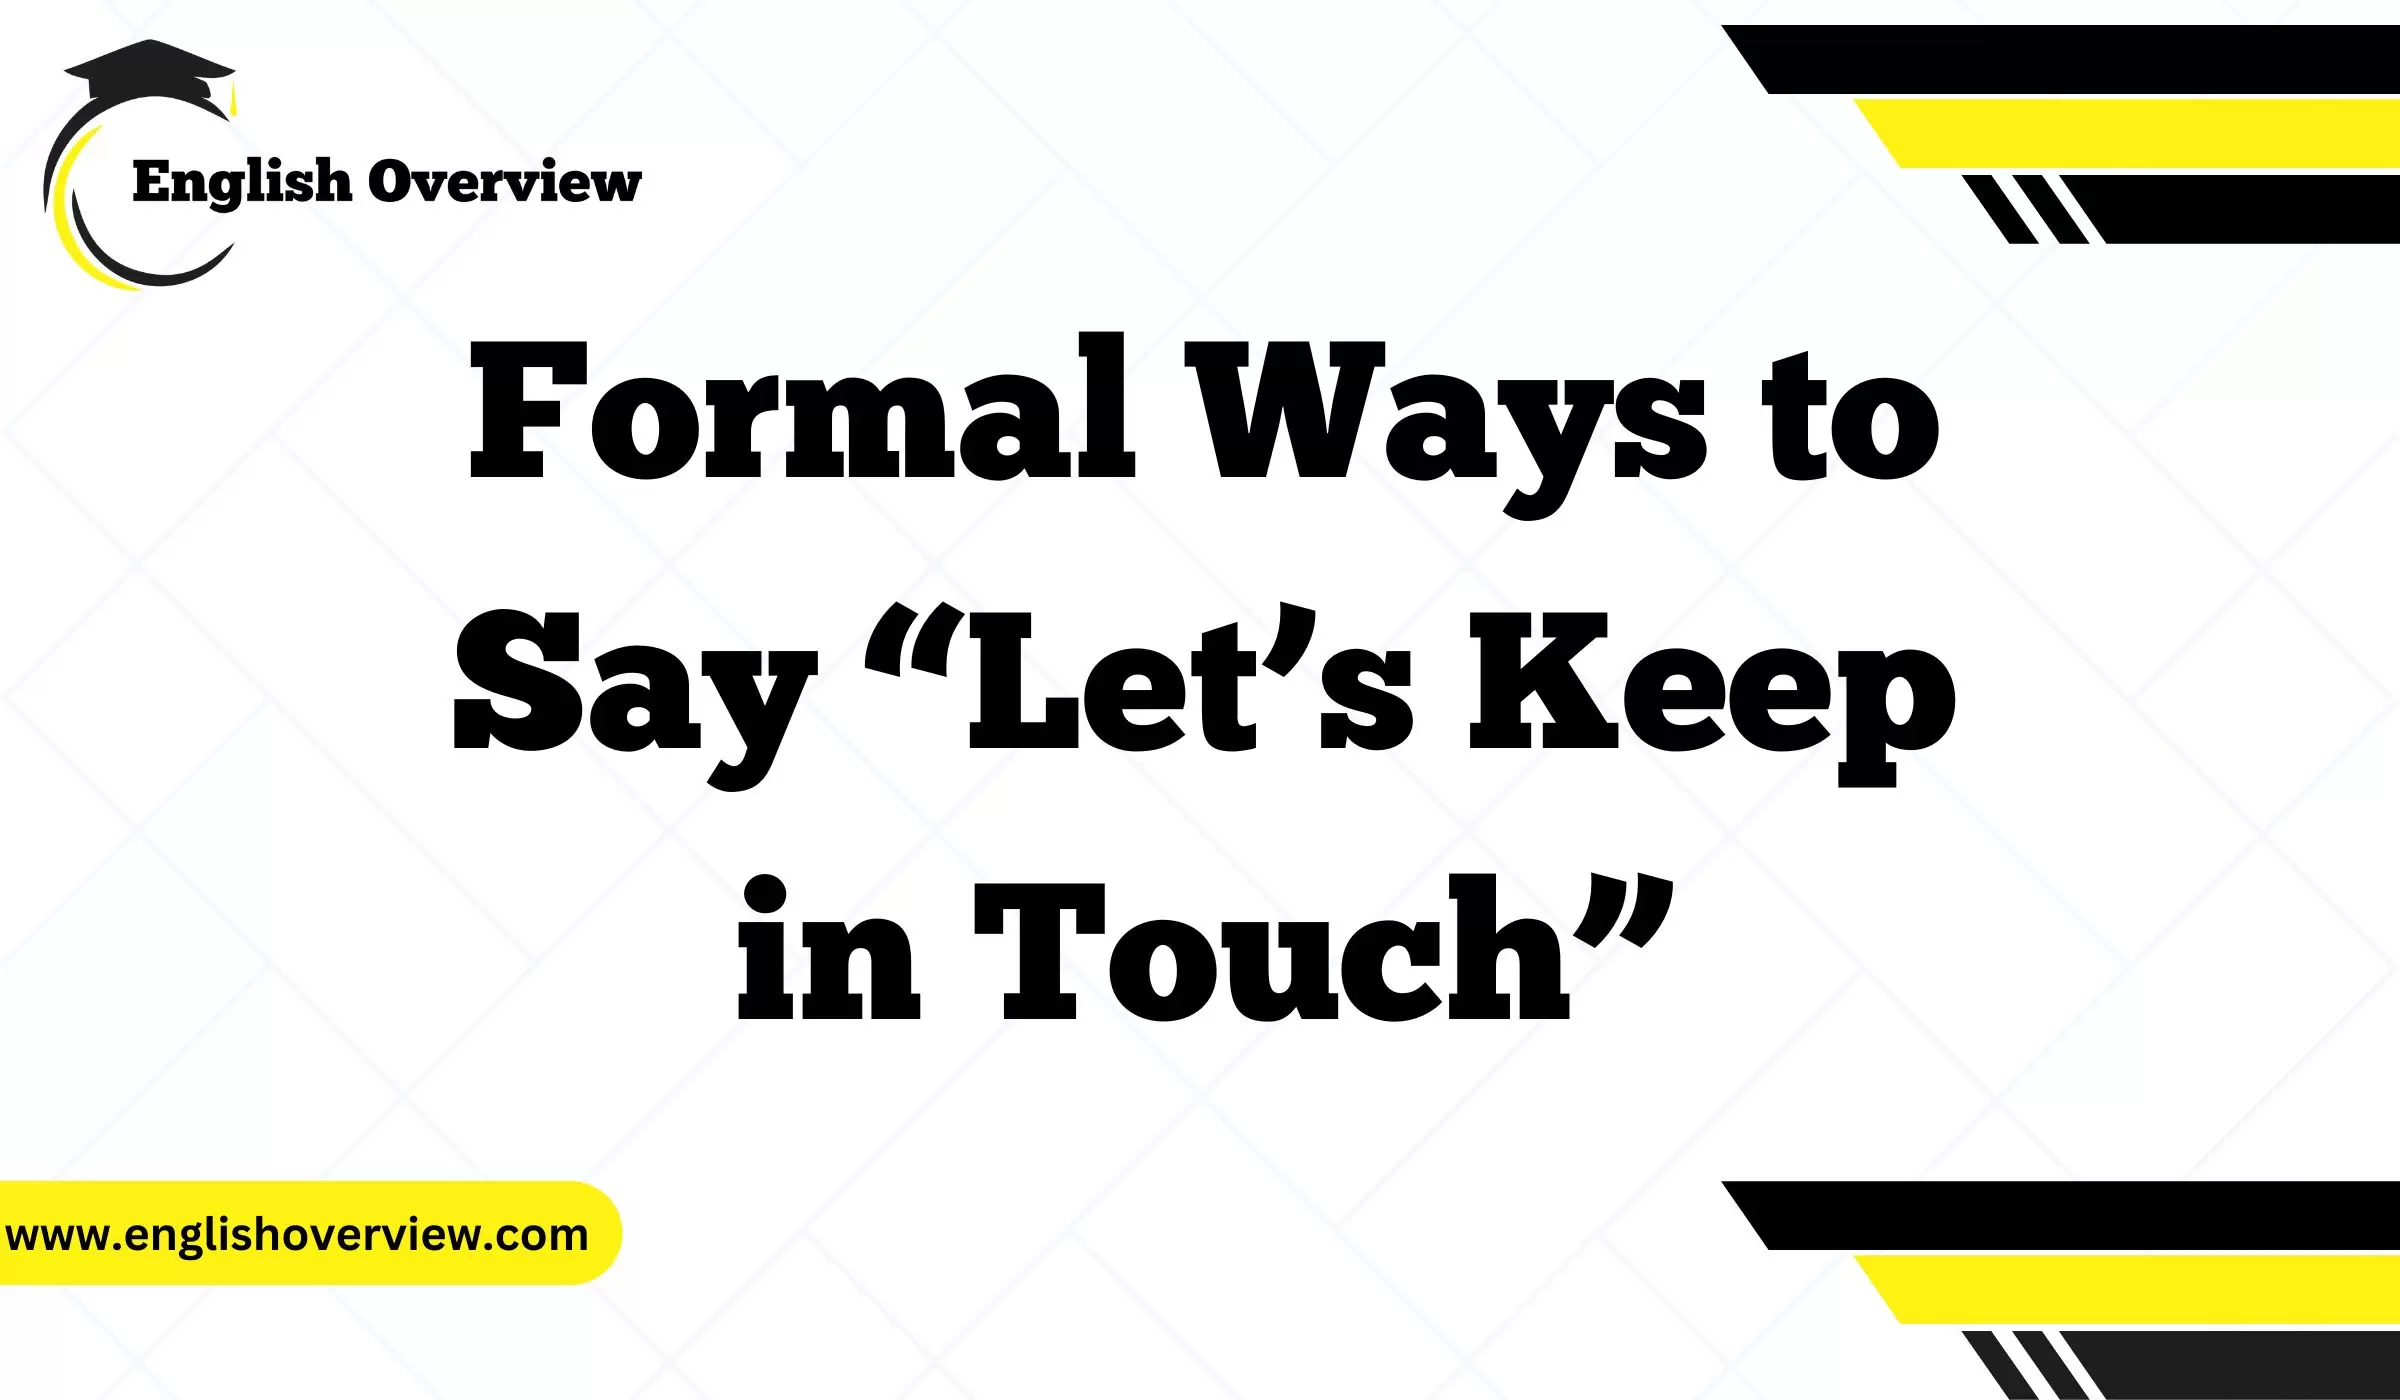 Formal Ways to Say “Let’s Keep in Touch”